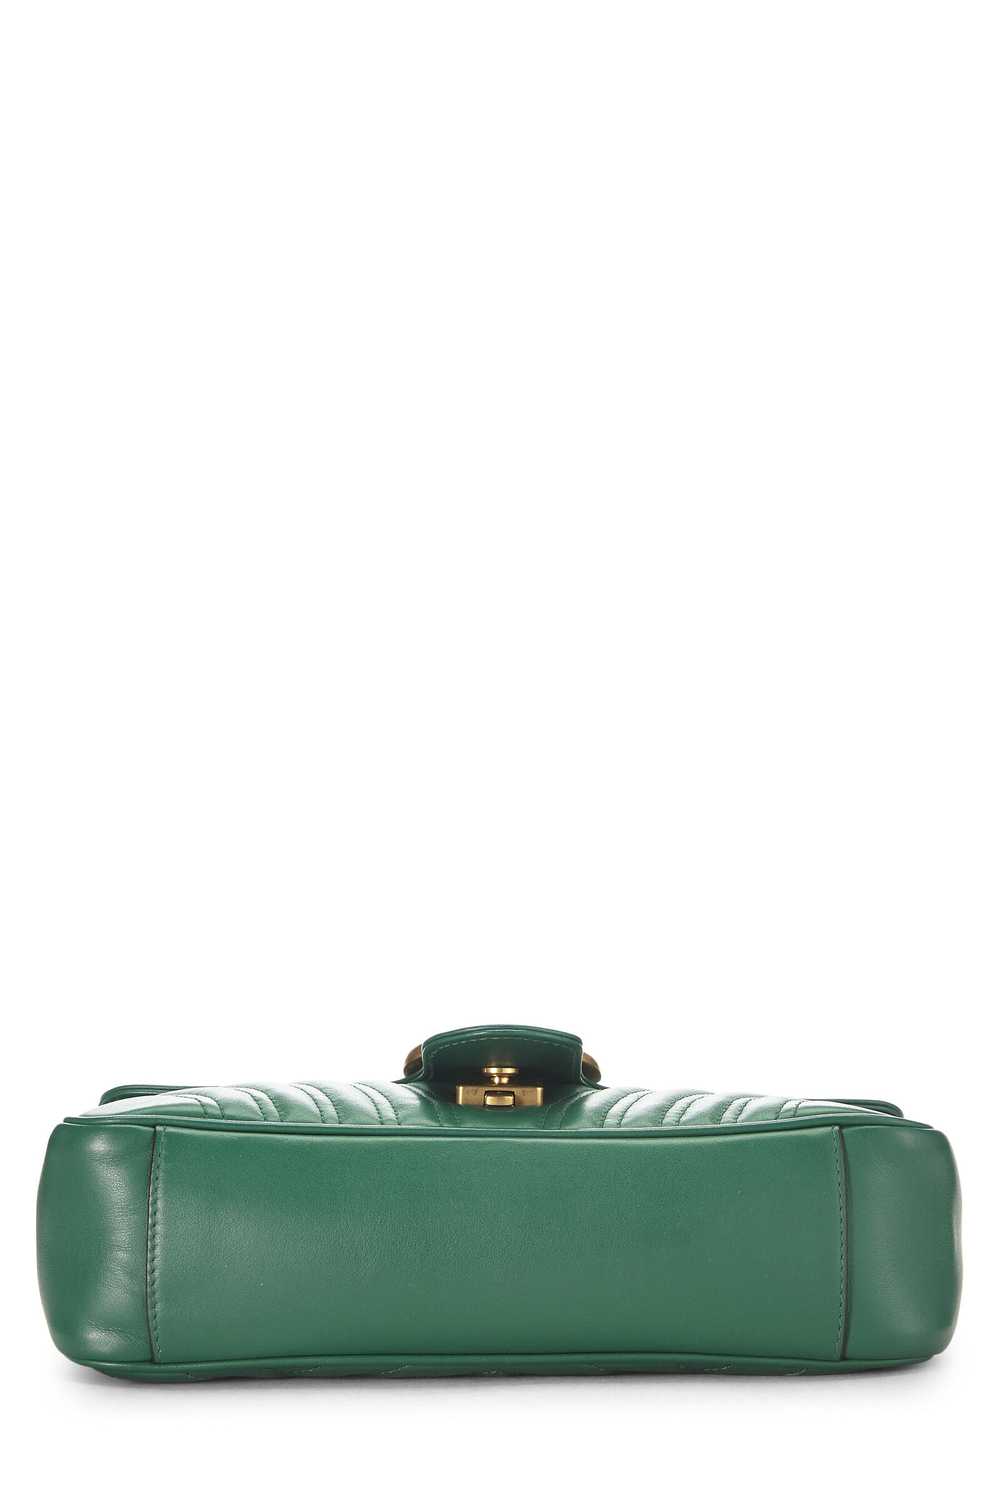 Green Leather GG Marmont Shoulder Bag Small - image 5